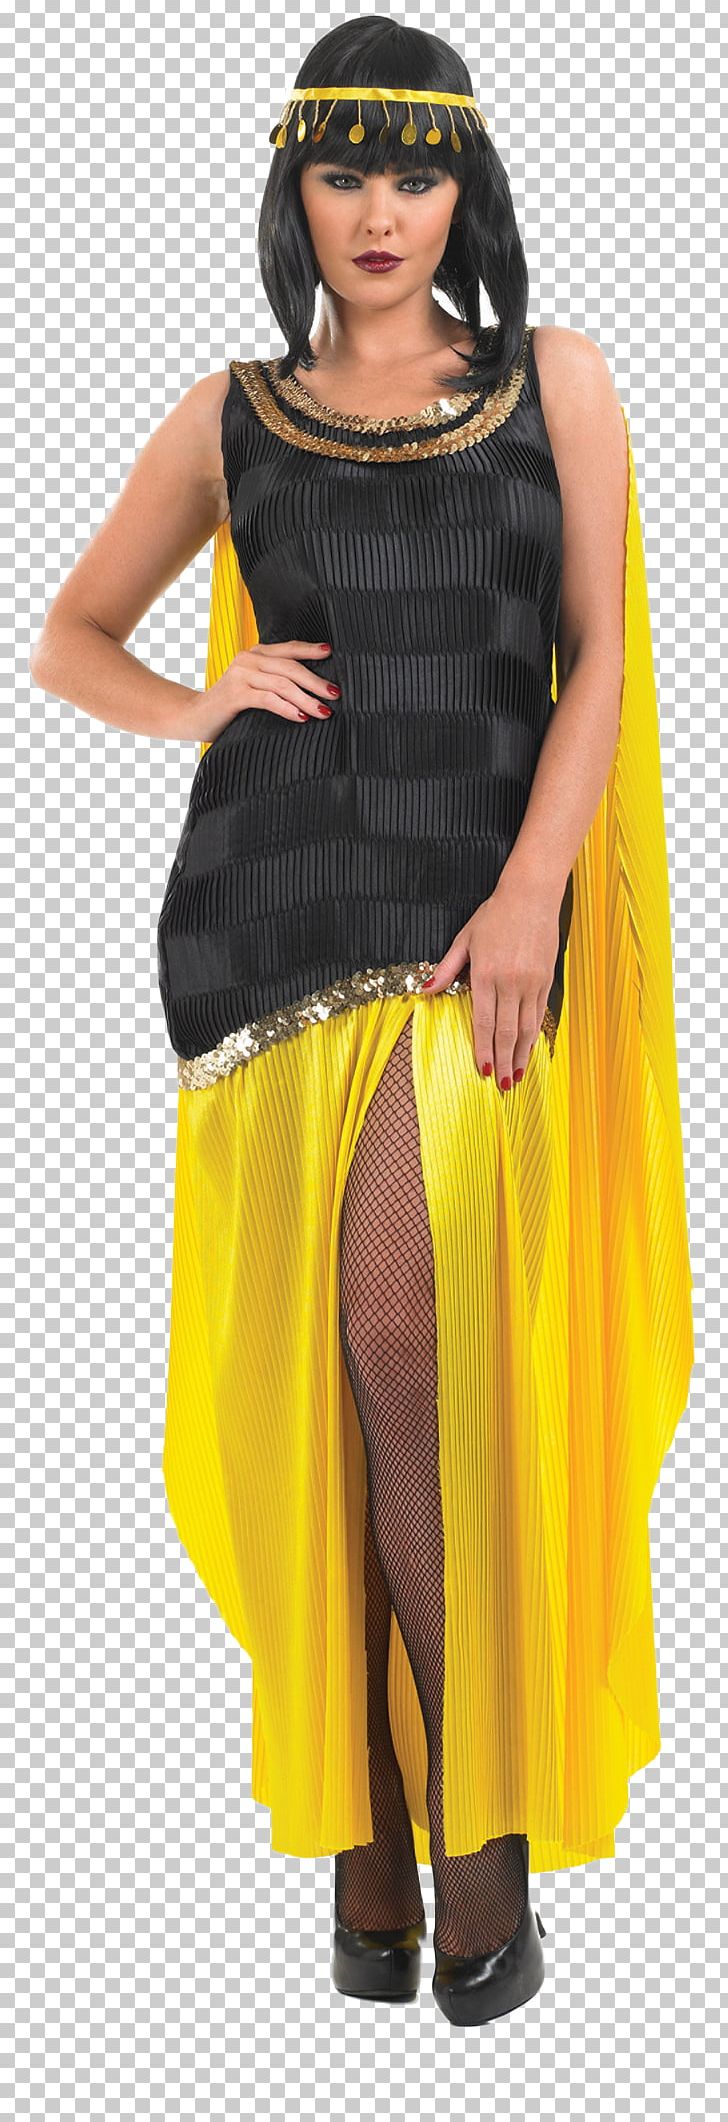 Cleopatra Costume Party Dress Clothing Sizes PNG, Clipart, Adult, Blouse, Cleopatra, Clothing, Clothing Sizes Free PNG Download